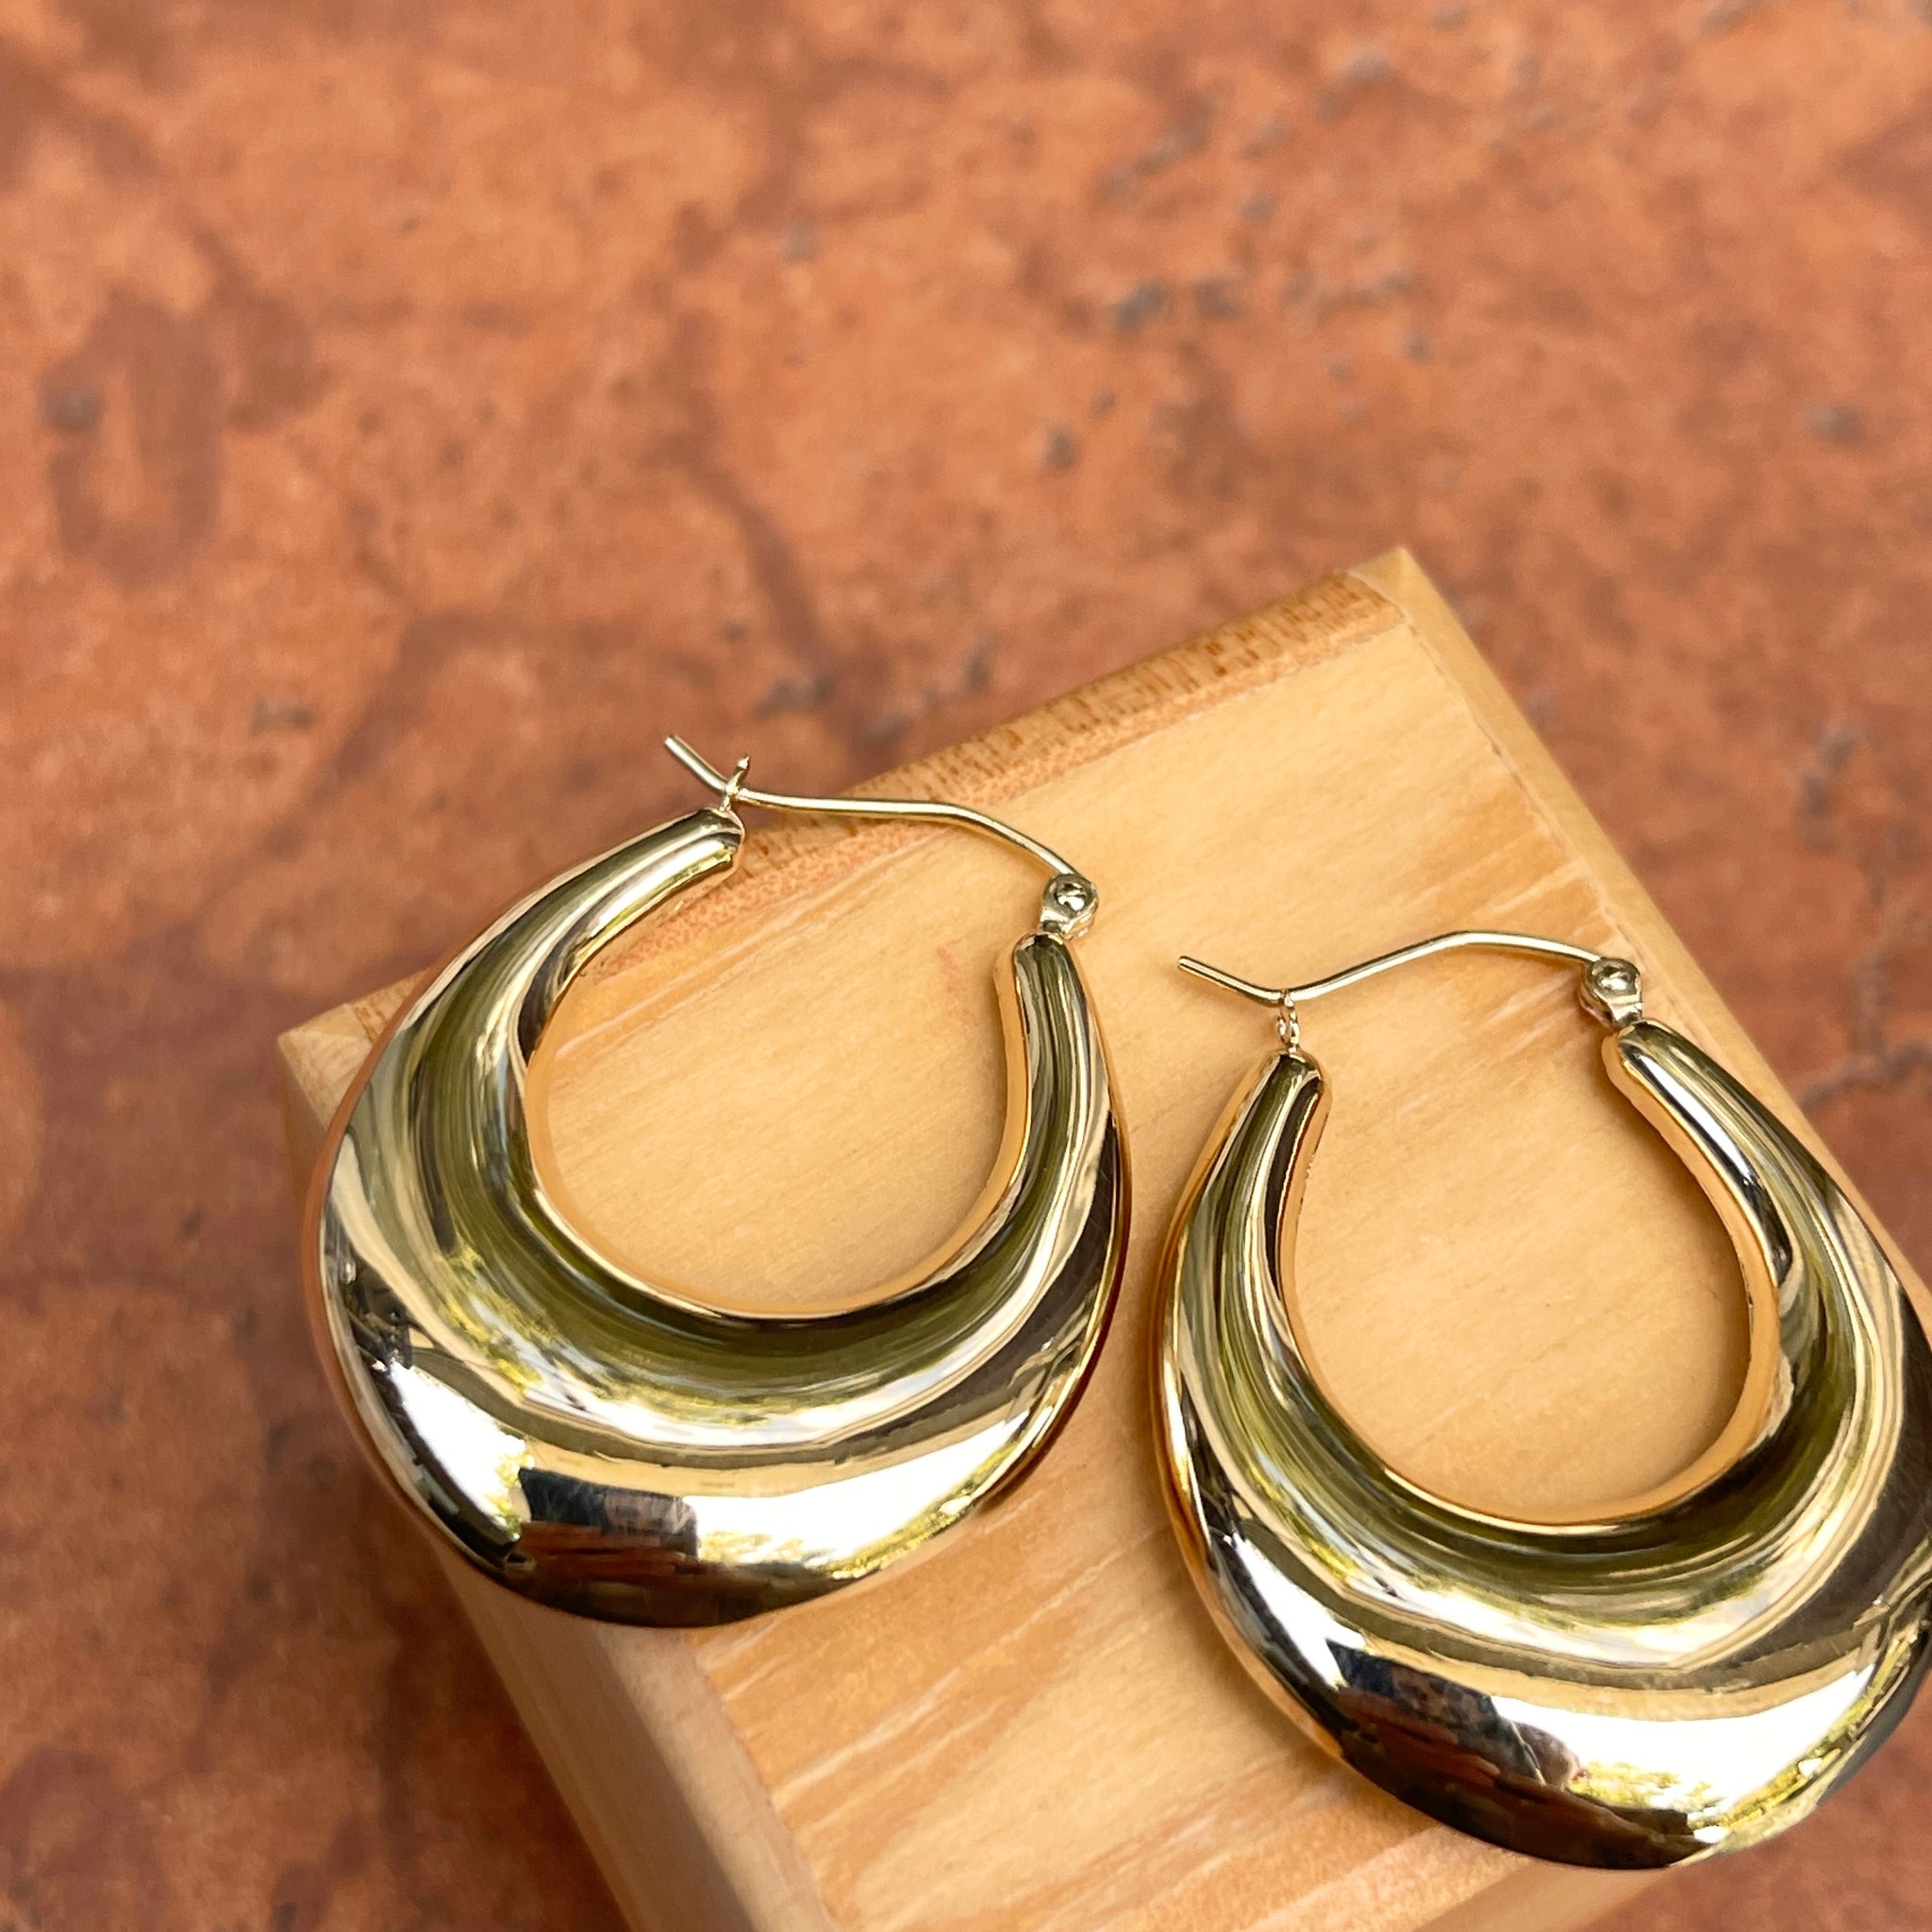 Thick Silver Hoops Creole Earrings Gold Hoops Chunky 